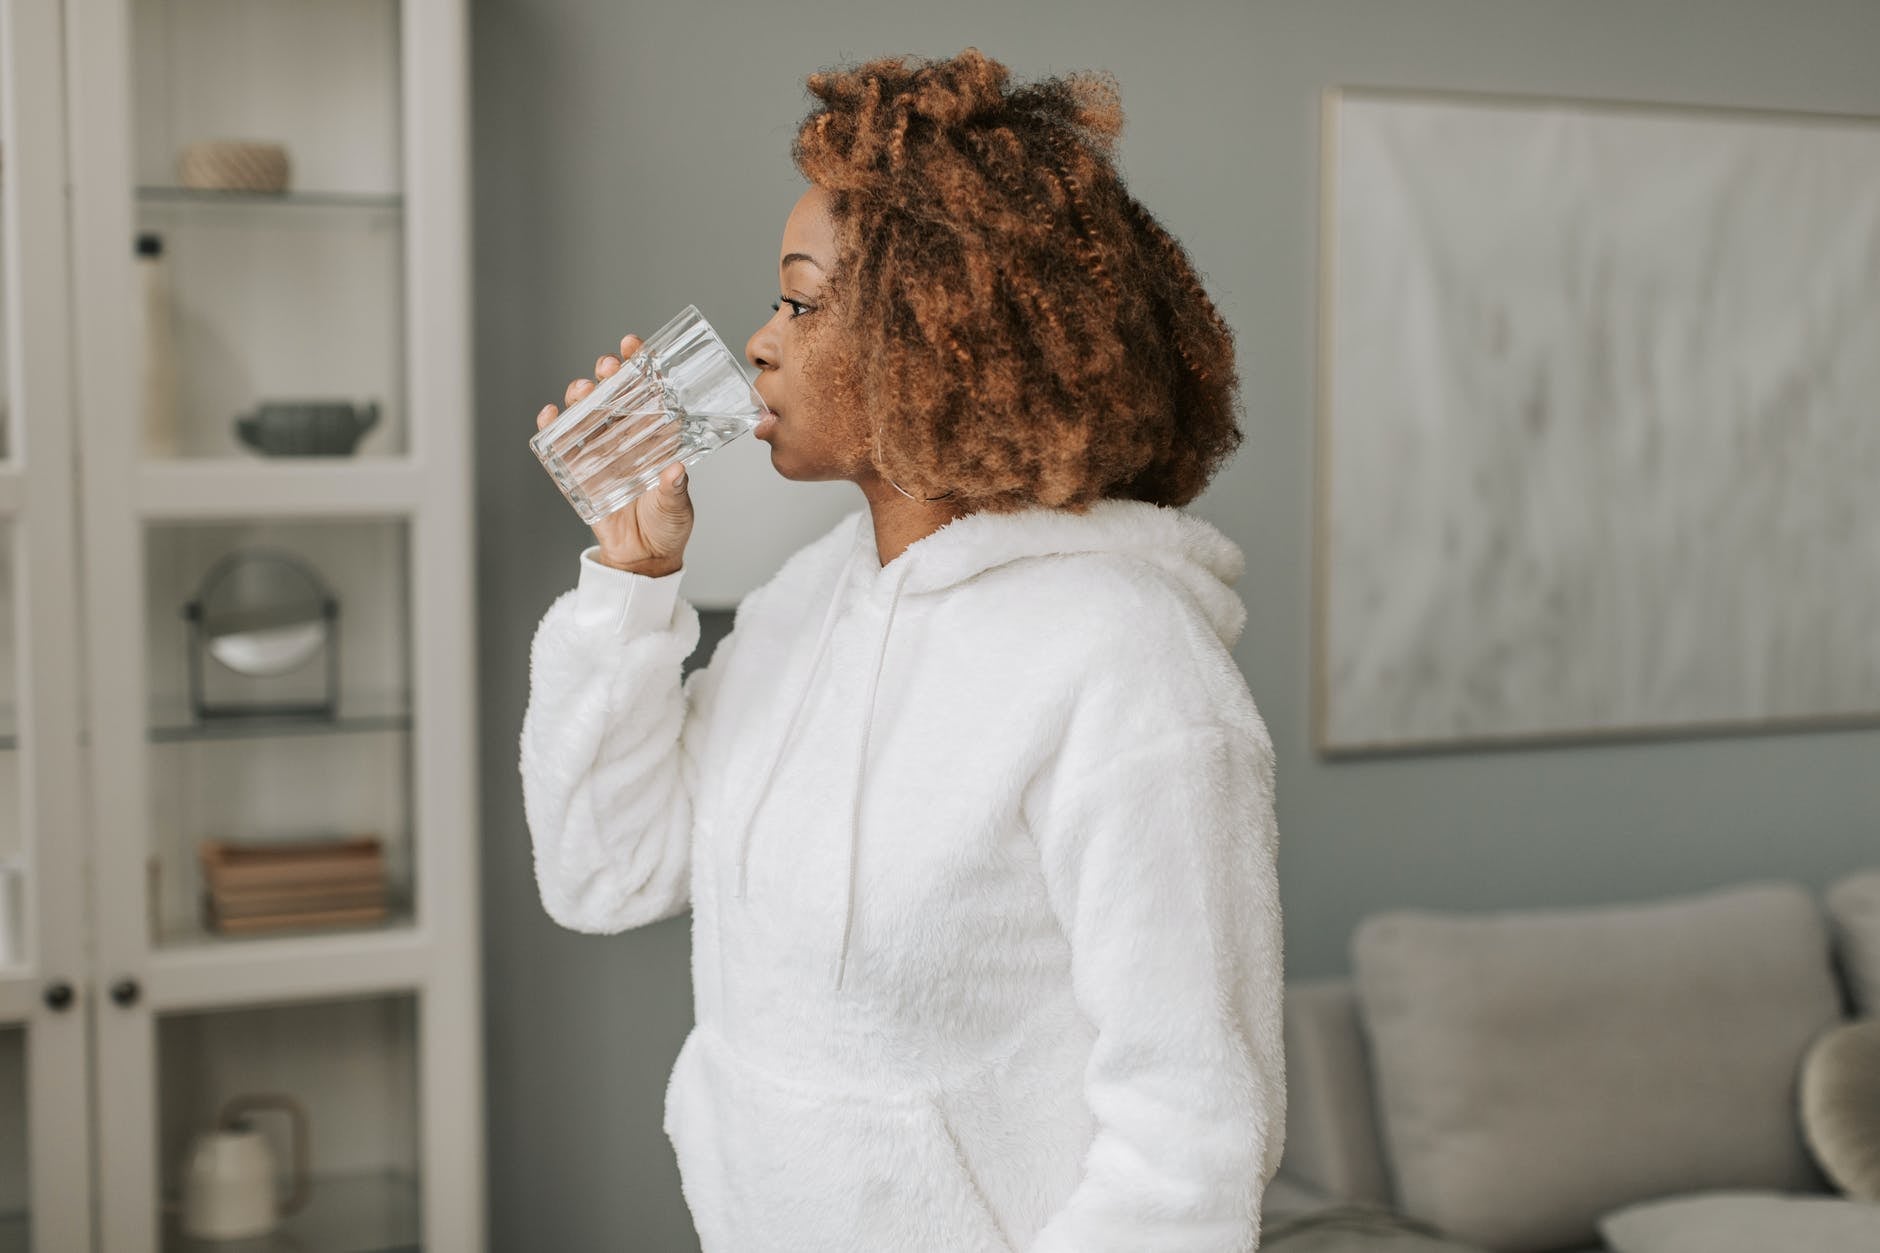 mid-shot of black woman drinking a glass of water